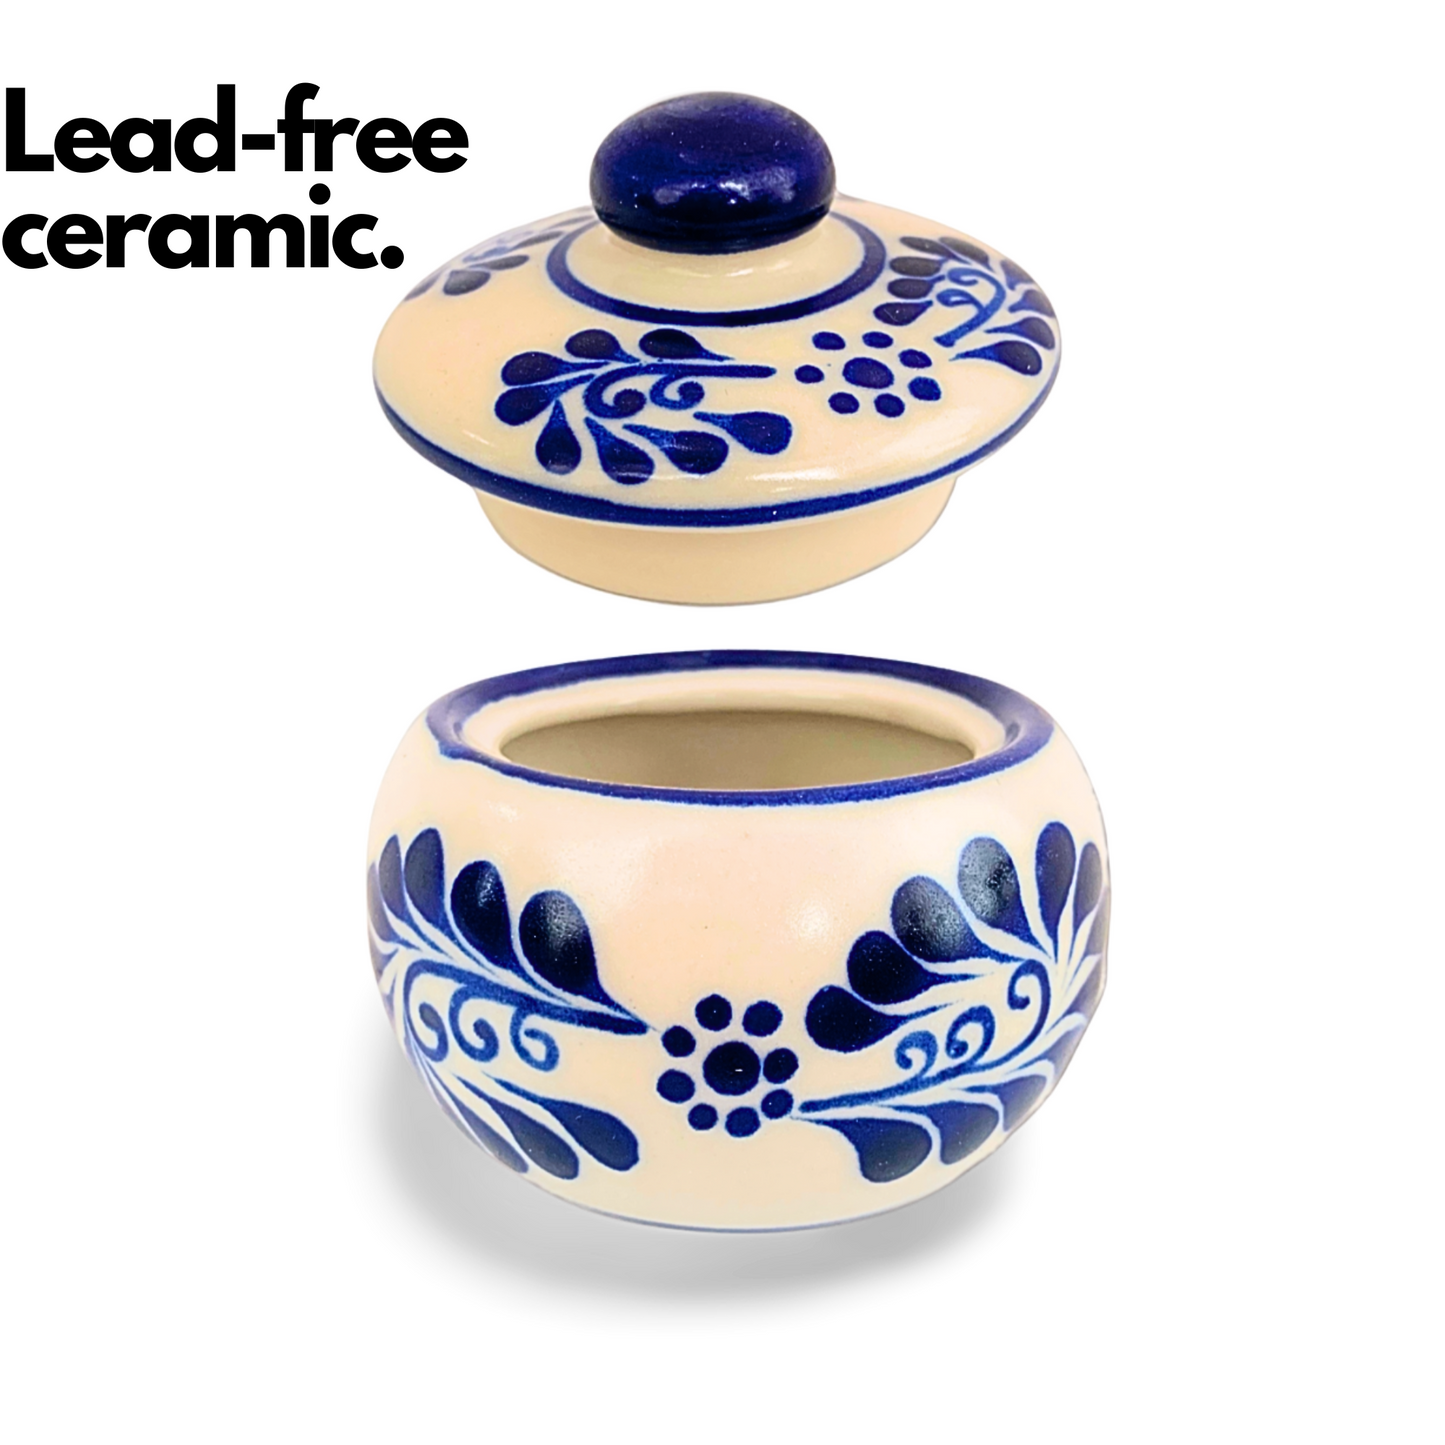 Hand-painted Talavera ceramic sugar bowl, offering a touch of authentic Mexican craftsmanship and versatile use for sugar, tea, or spices.